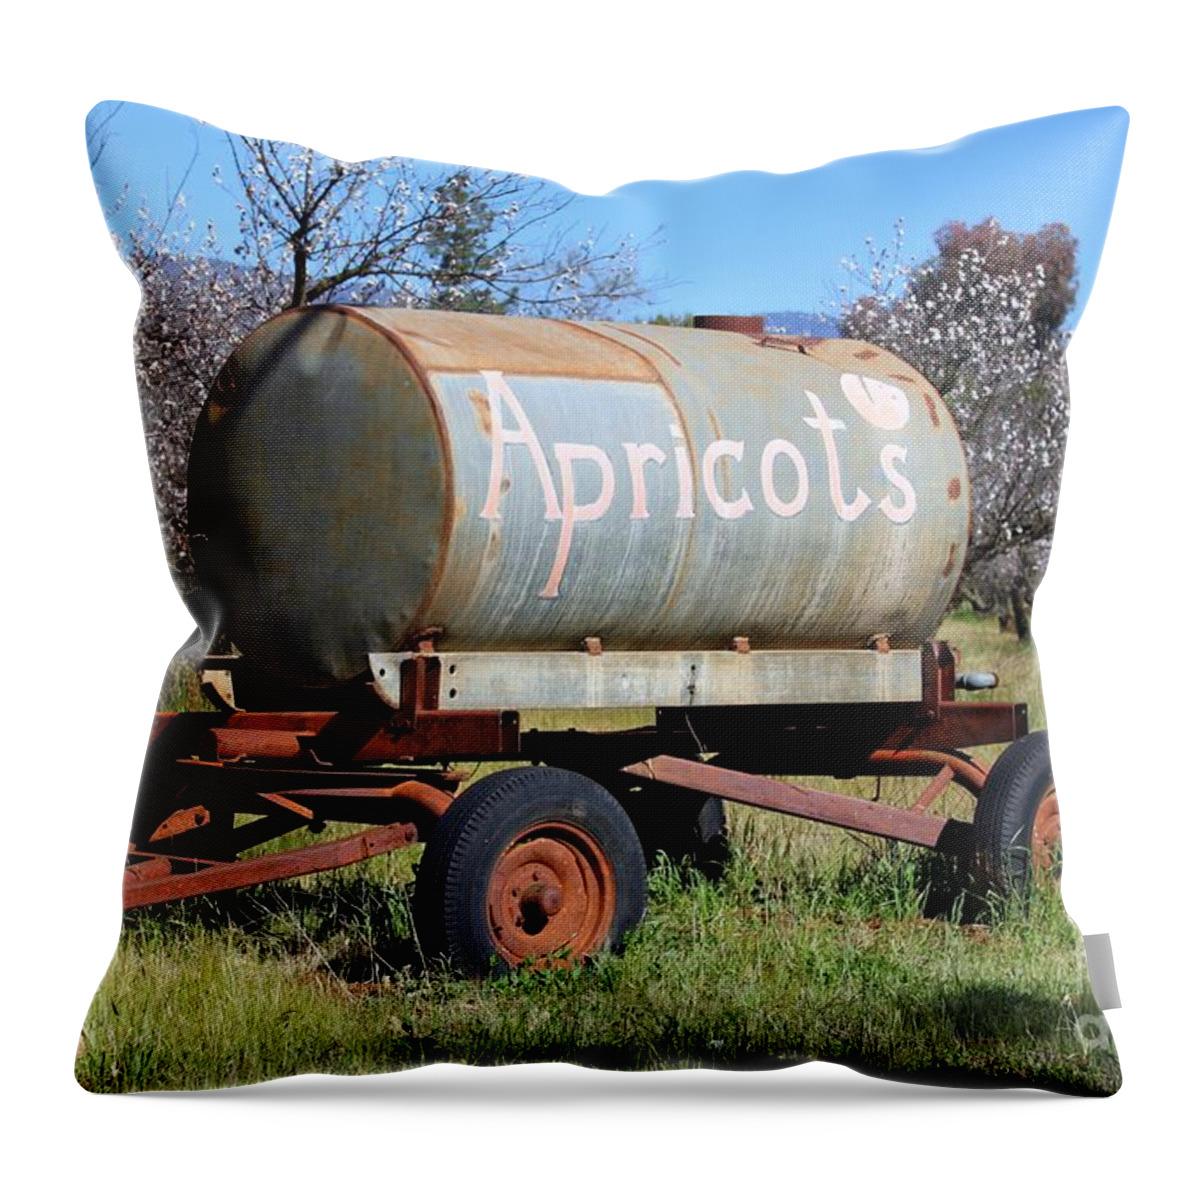 Apricot Throw Pillow featuring the photograph Apricots #1 by Henrik Lehnerer